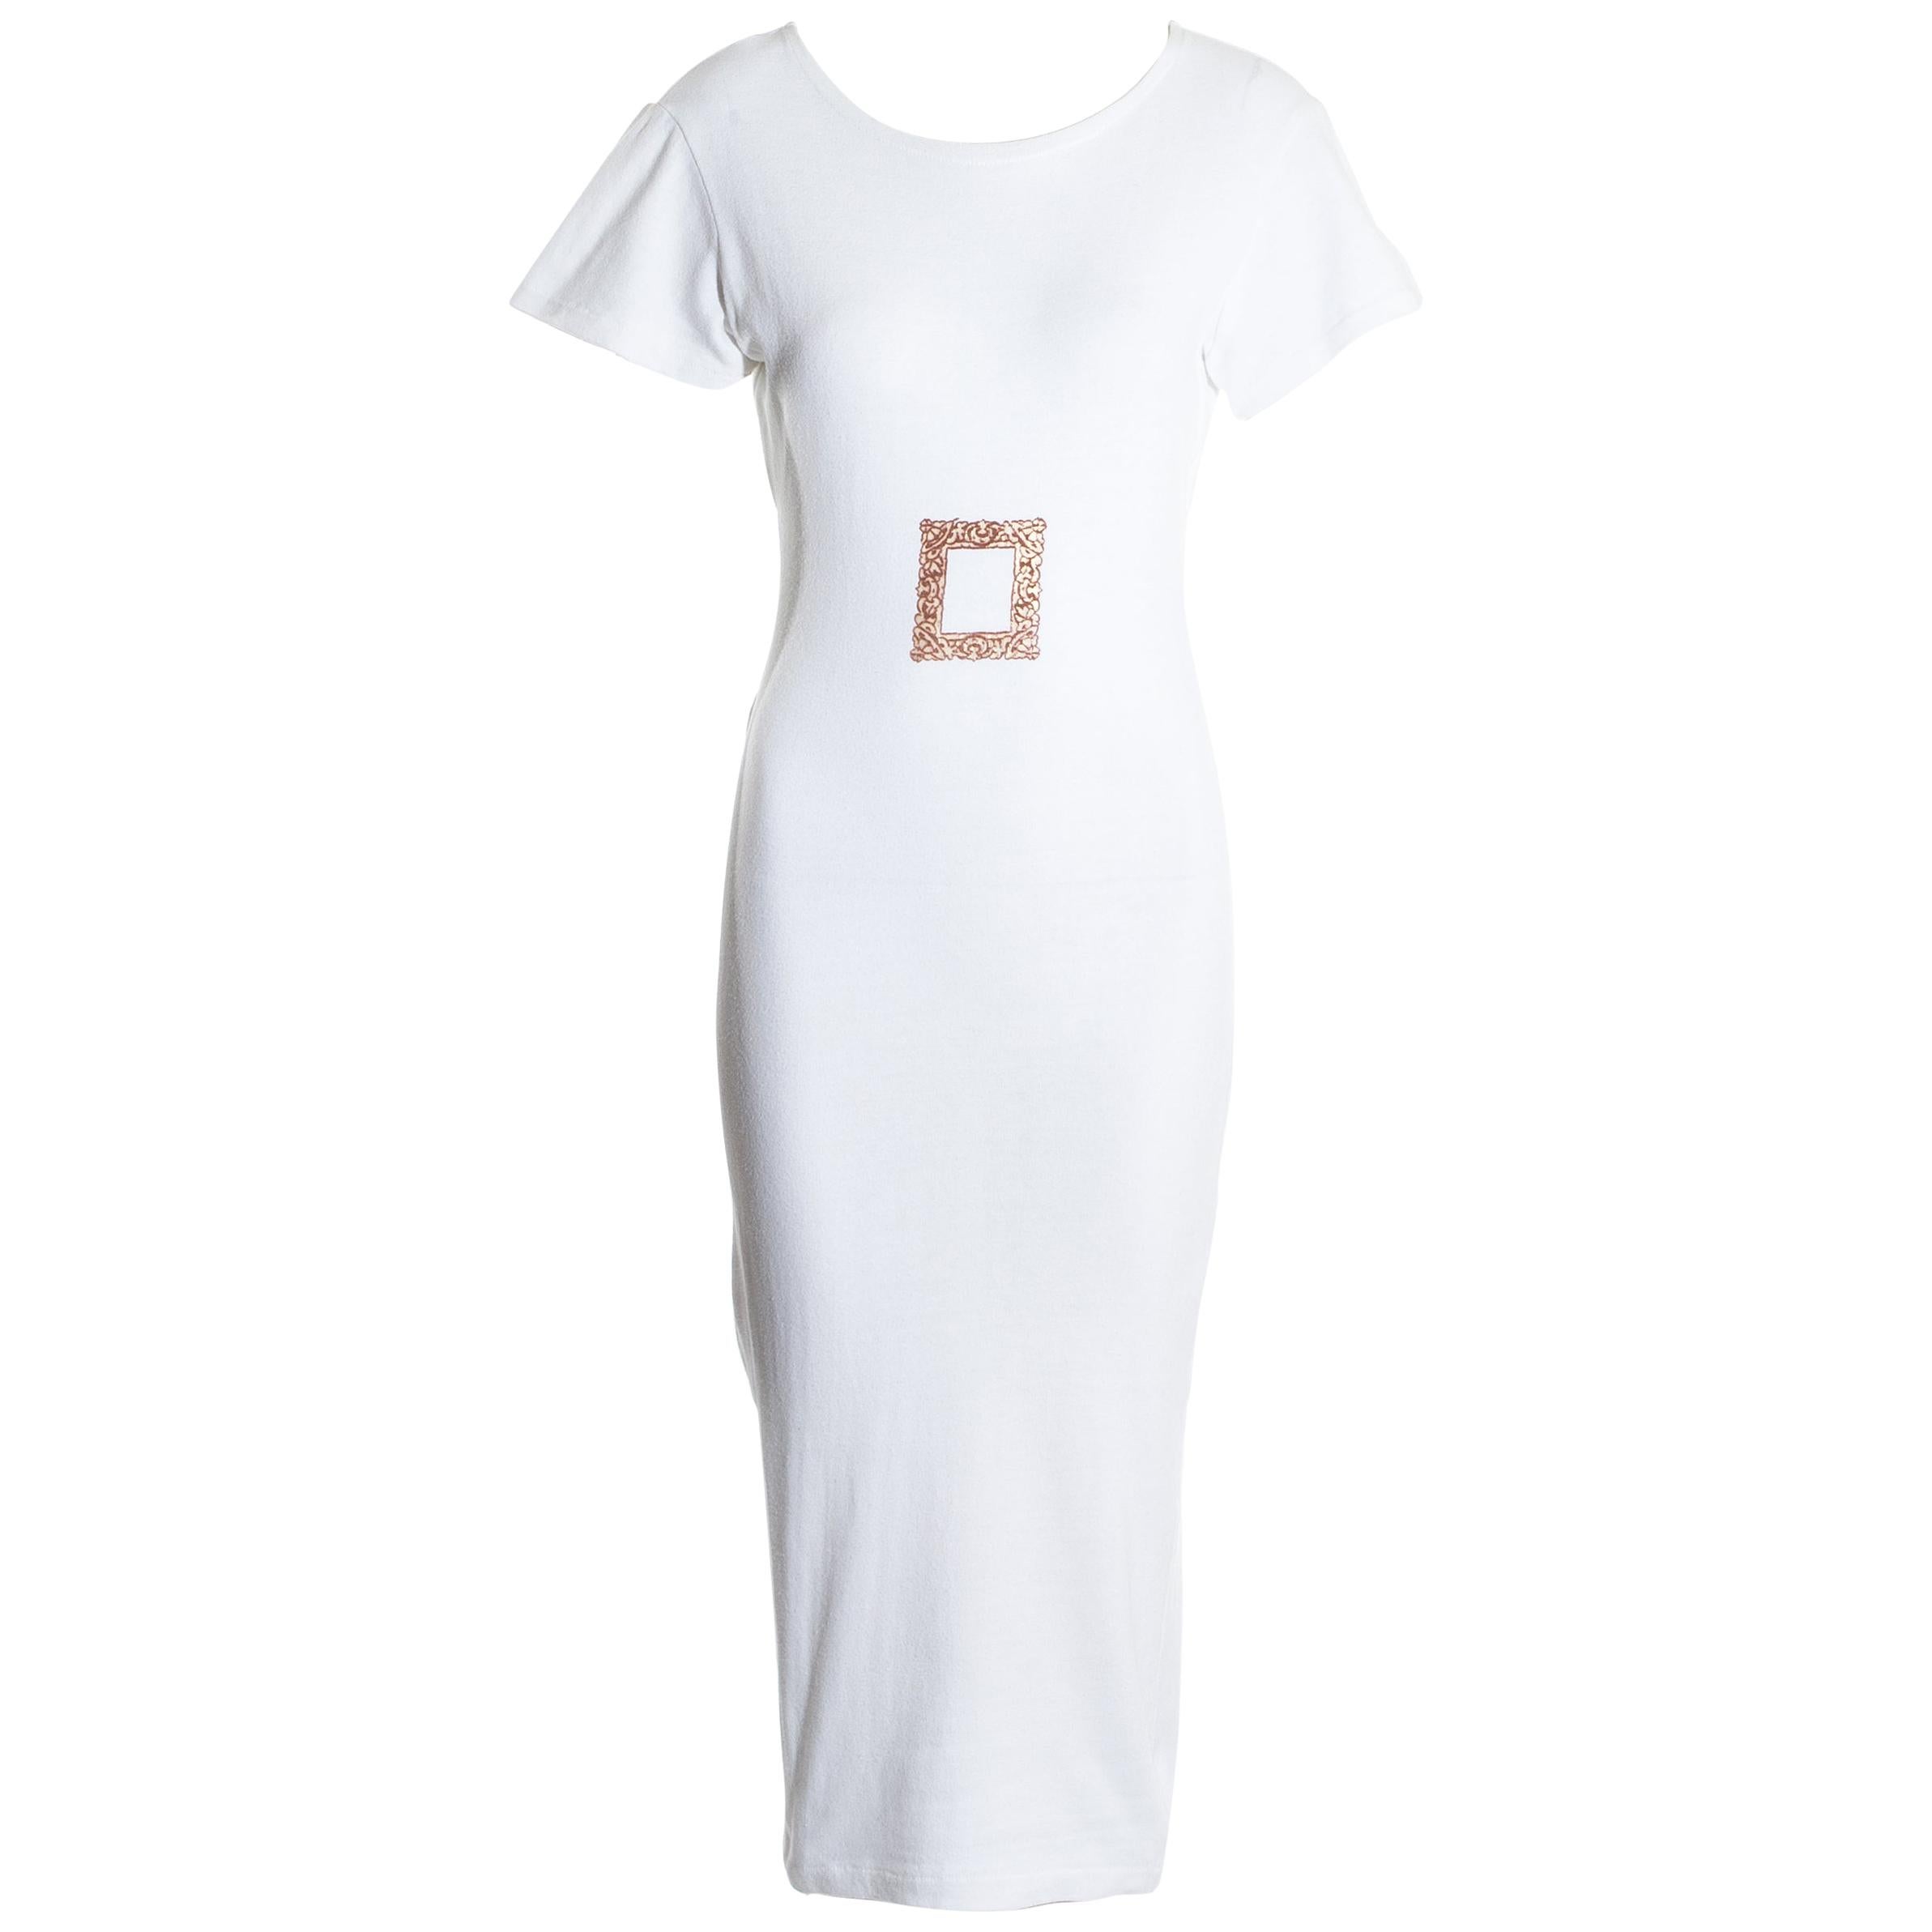 Vivienne Westwood white cotton jersey dress, ss 1989 For Sale